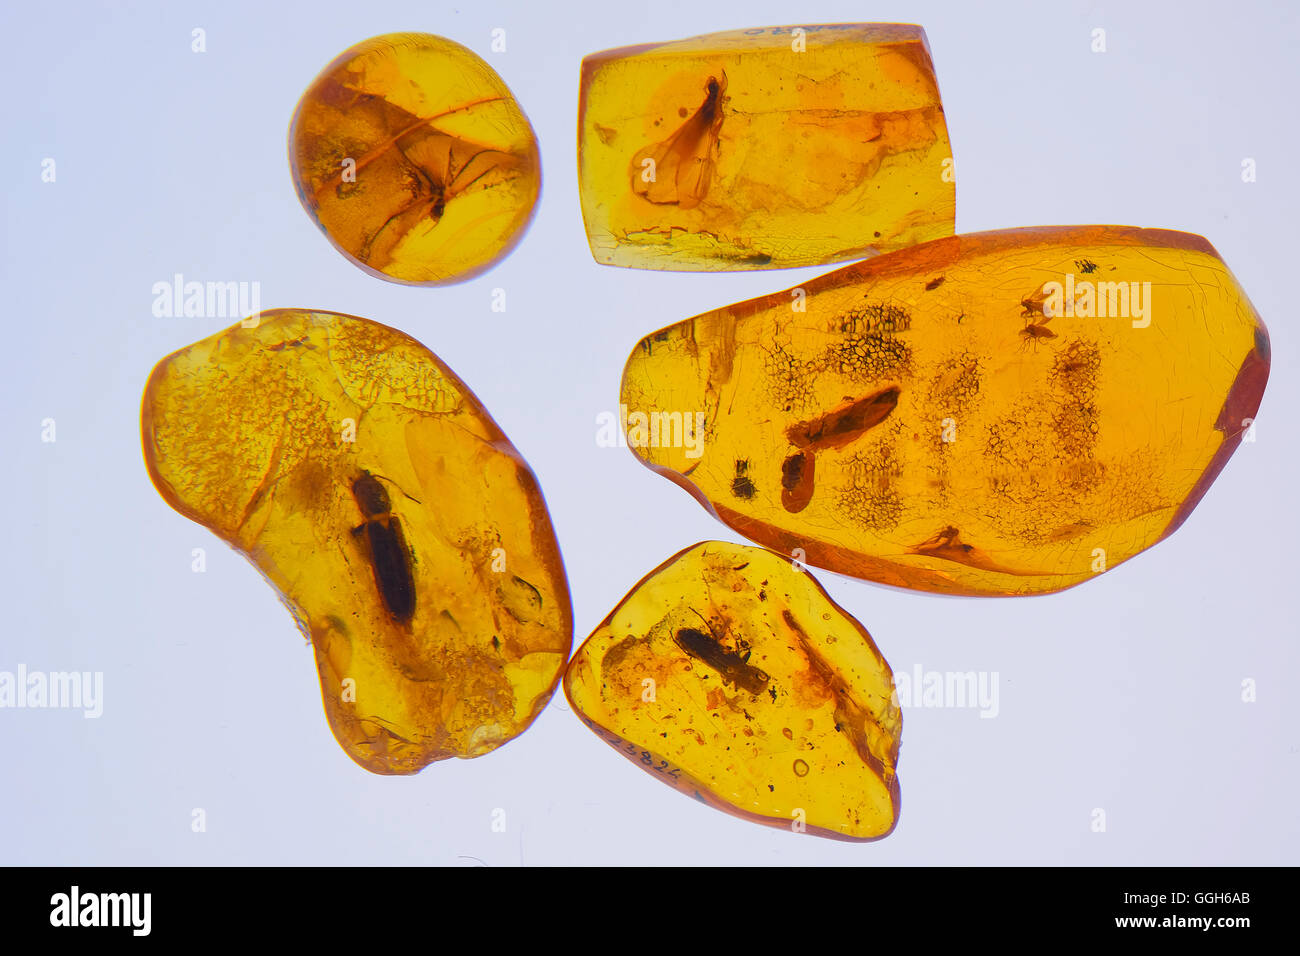 Typical amber specimen with a number of indistinct inclusions displayed at the Amber museum inside the the Tyszkiewicz Palace in the seaside resort town of Palanga, Lithuania. The Baltic region is home to the largest known deposit of amber. It dates from 44 millions years ago and includes the most species-rich fossil insect fauna discovered to date. Stock Photo